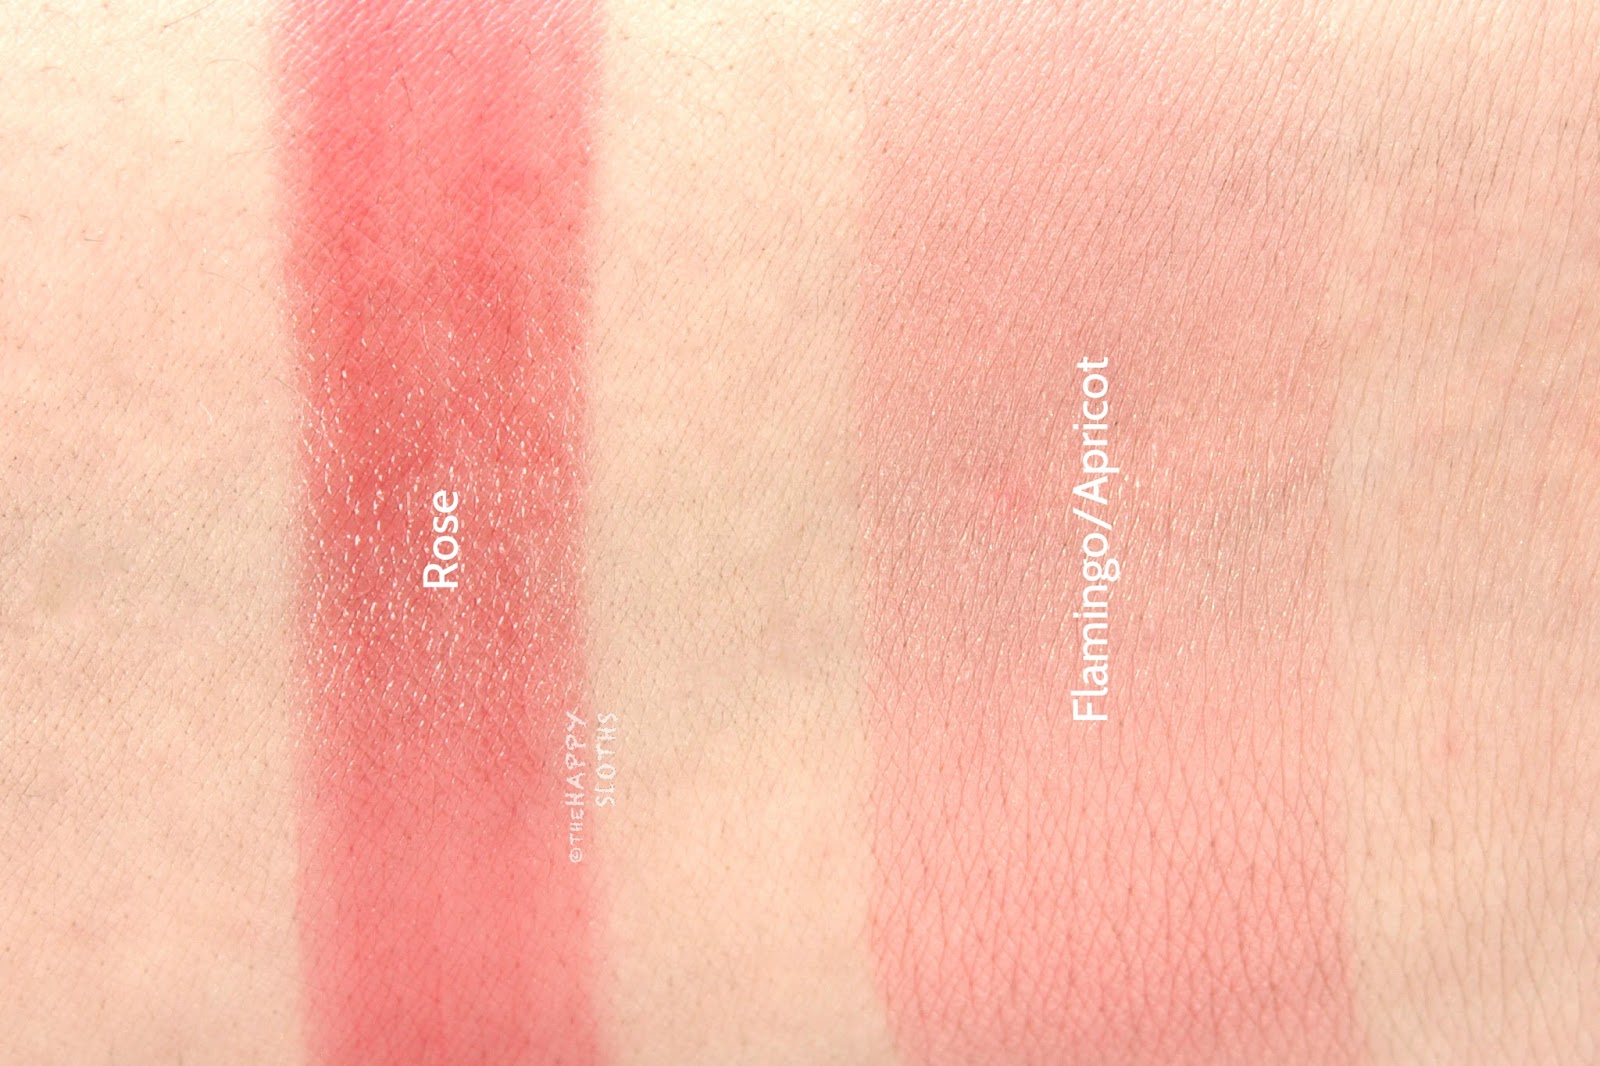 Beautycounter Color Sweep Blush Duo in "Flamingo/Apricot": Swatches & Review